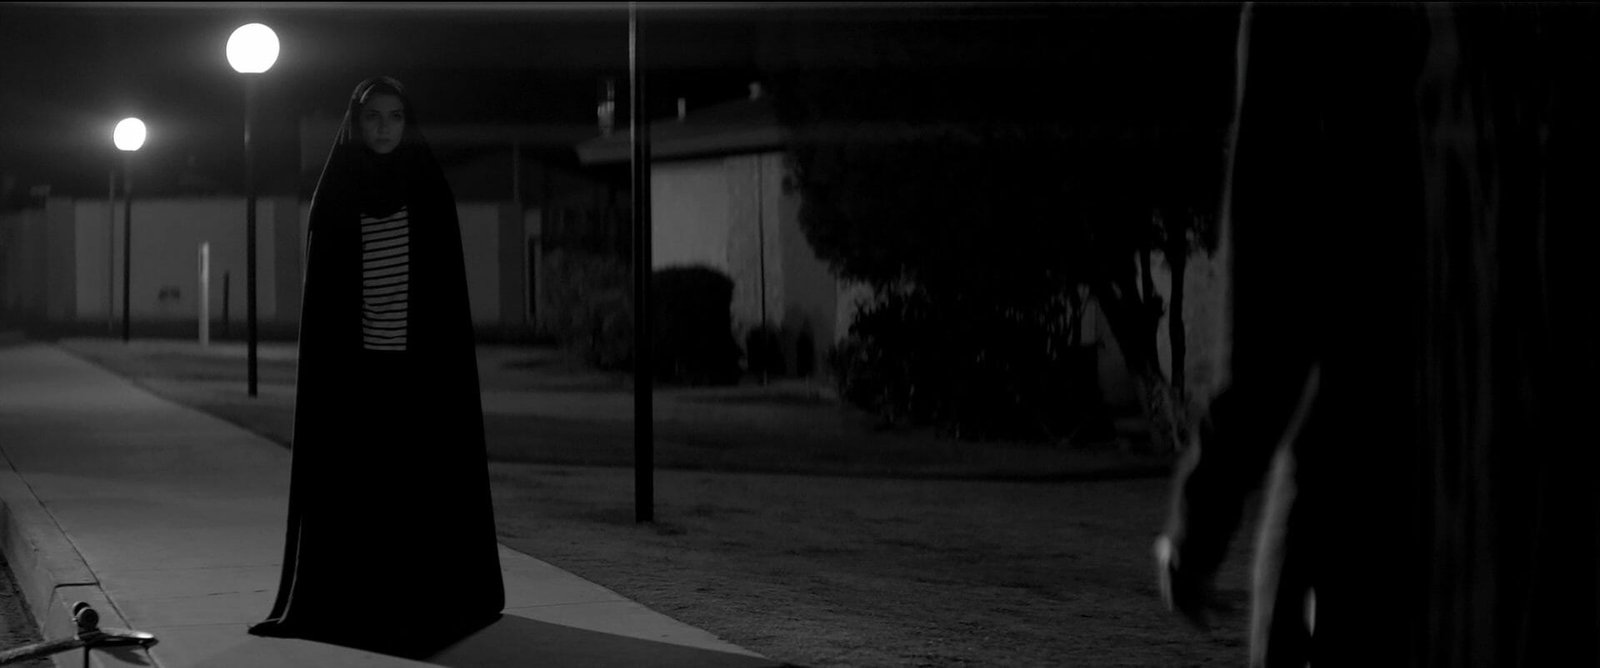 Best vampire movies: A Girl Walks Home Alone at Night